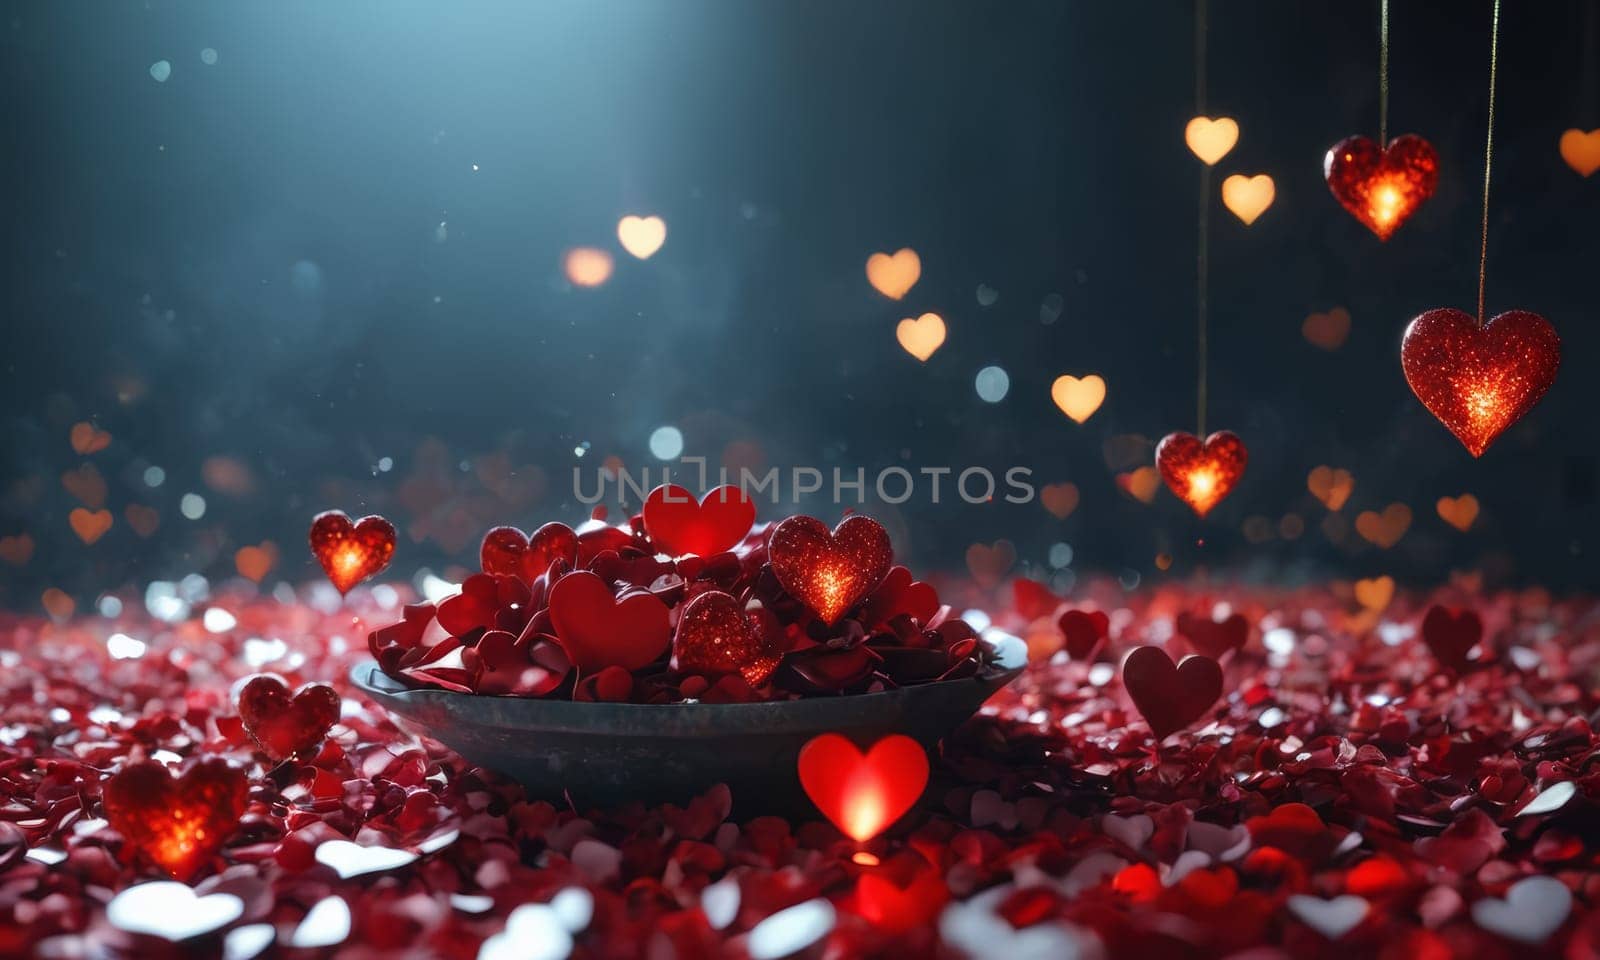 Glistening hearts rest amidst a shower of smaller heart shapes. The radiant glow and the deep red hue evoke a sense of warmth and affection. Ideal for expressing love and romance. Valentine,s Day